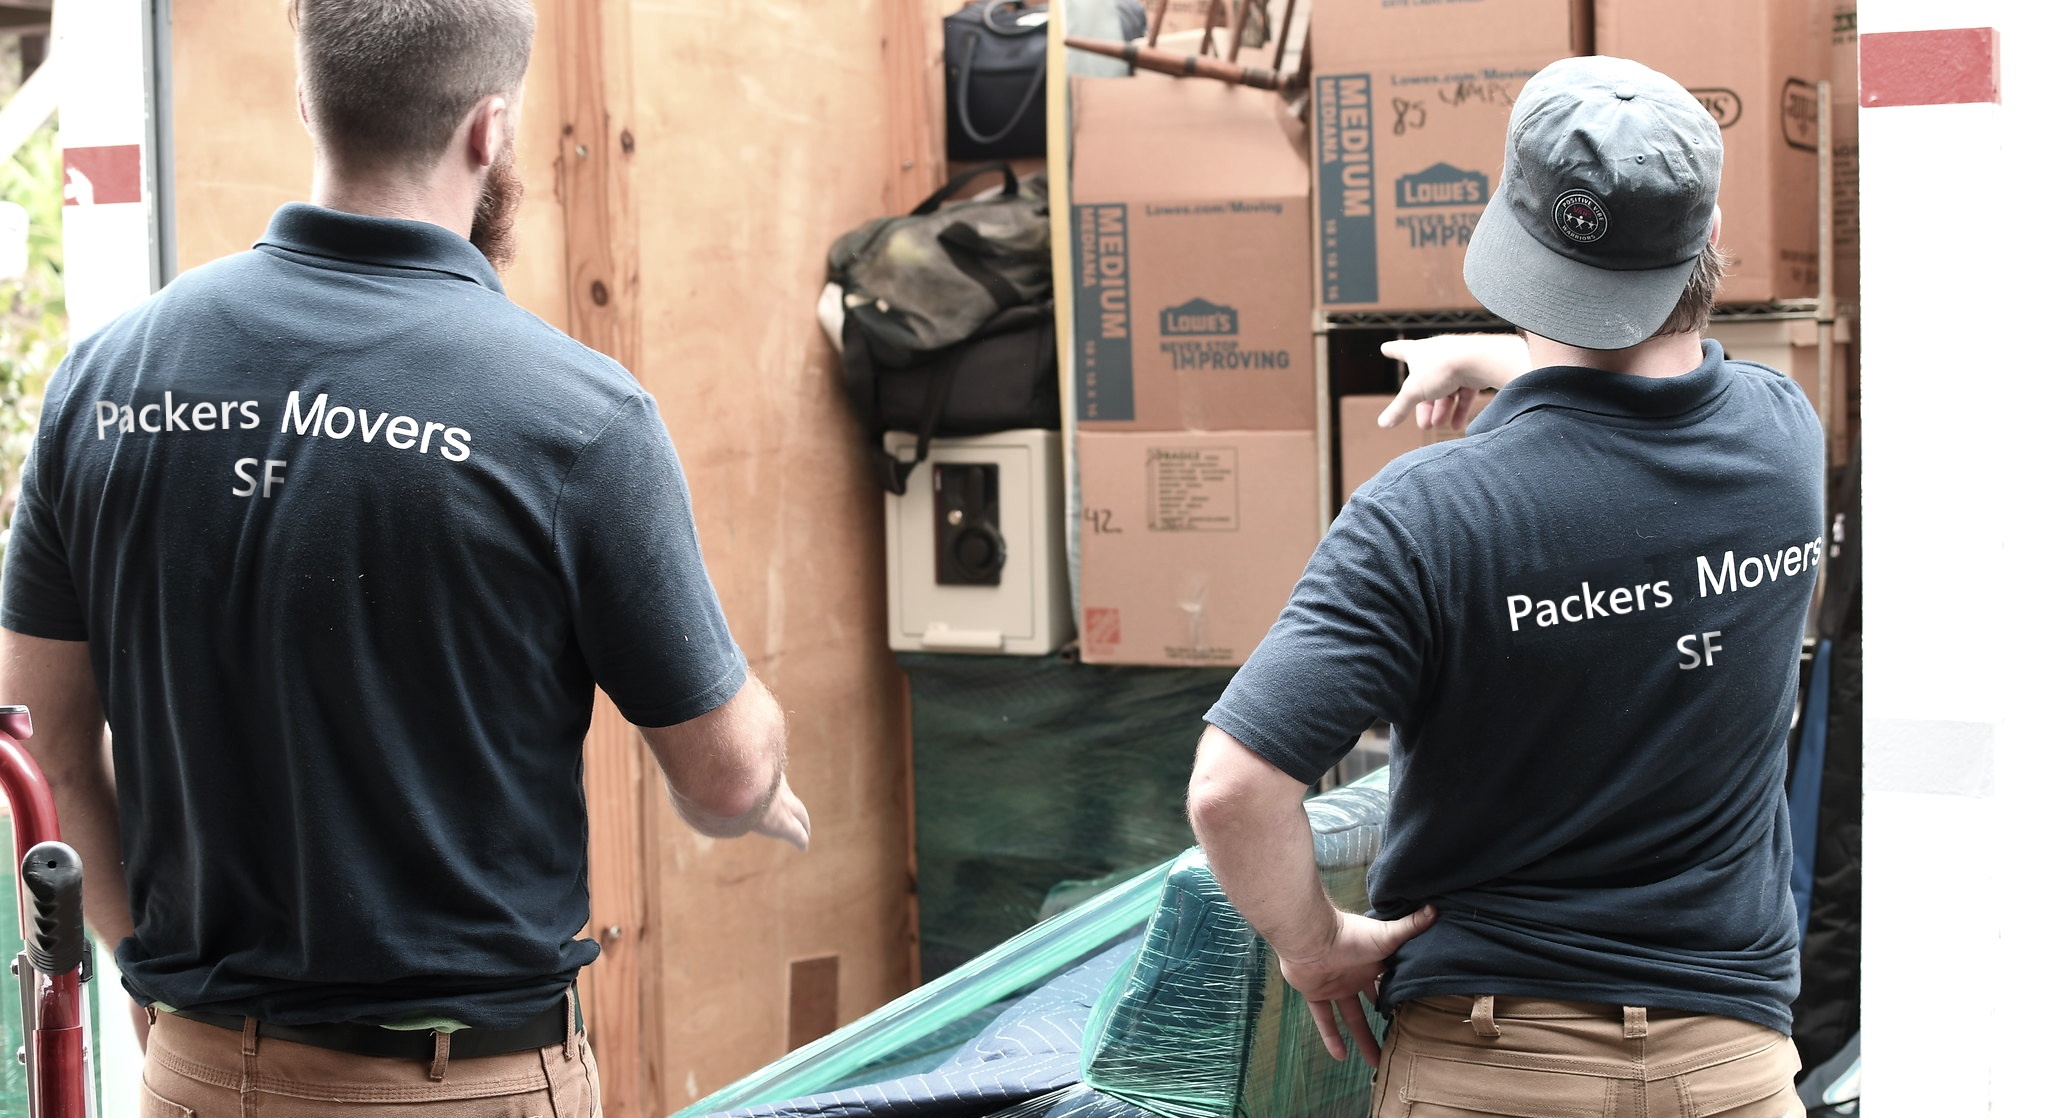 Packers Movers SF - SF Moving Company BG